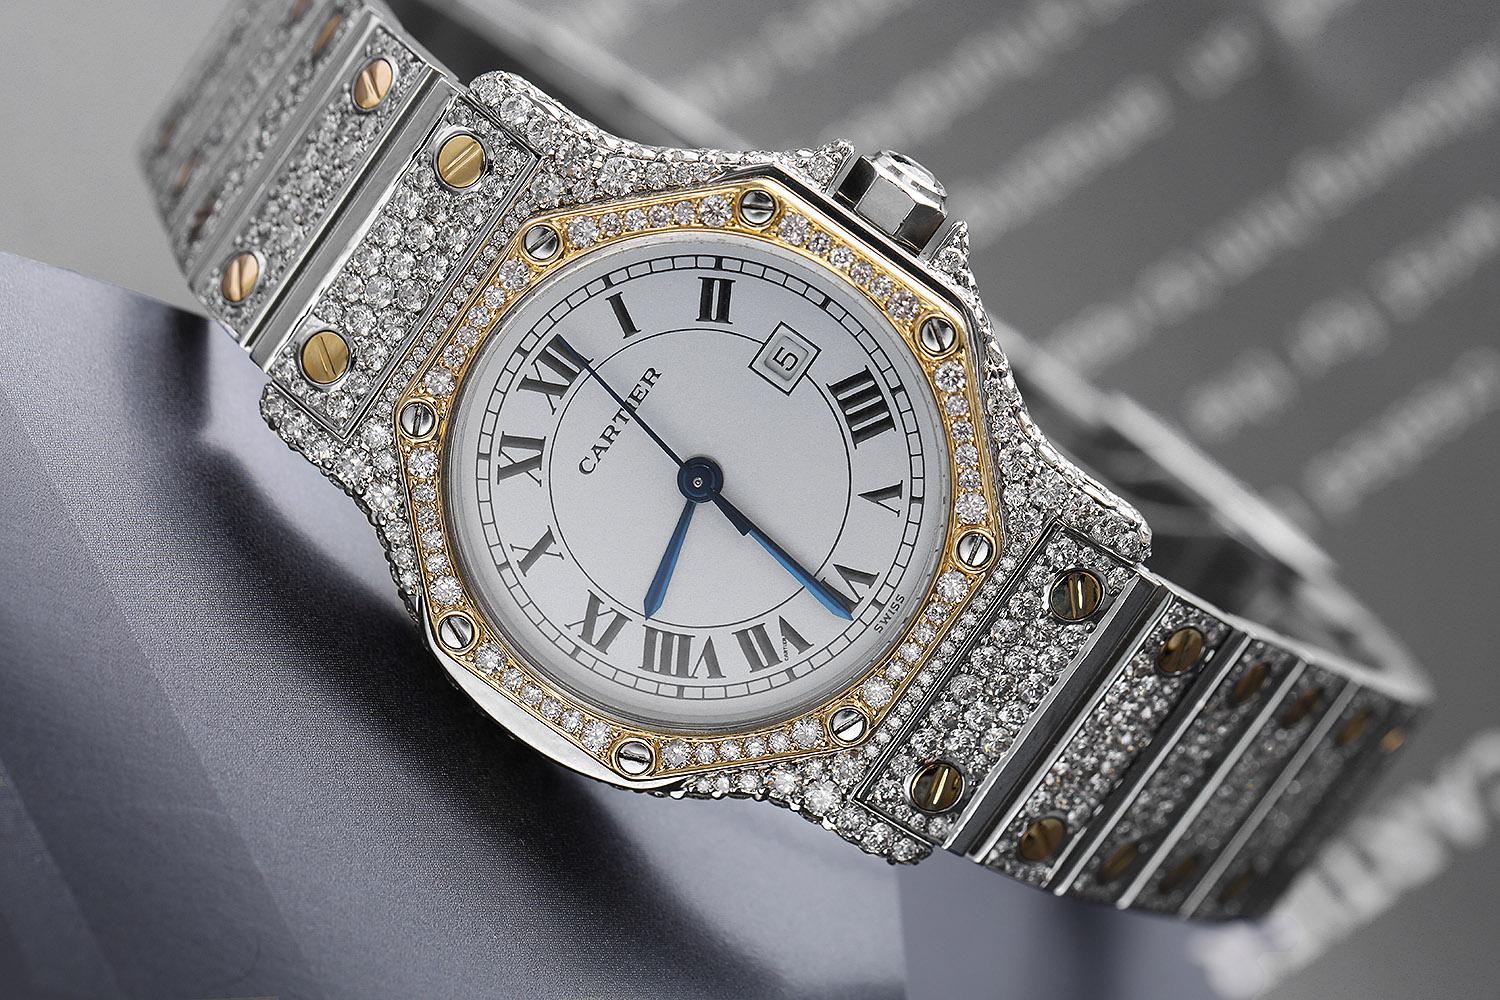 Cartier Santos Octagon 18K Gold and Steel Automatic Ladies Diamond Watch 2966.

This watch has been customized very recently. It has never been worn after diamonds were set and it does not have any visible scratches or blemishes. It is covered by